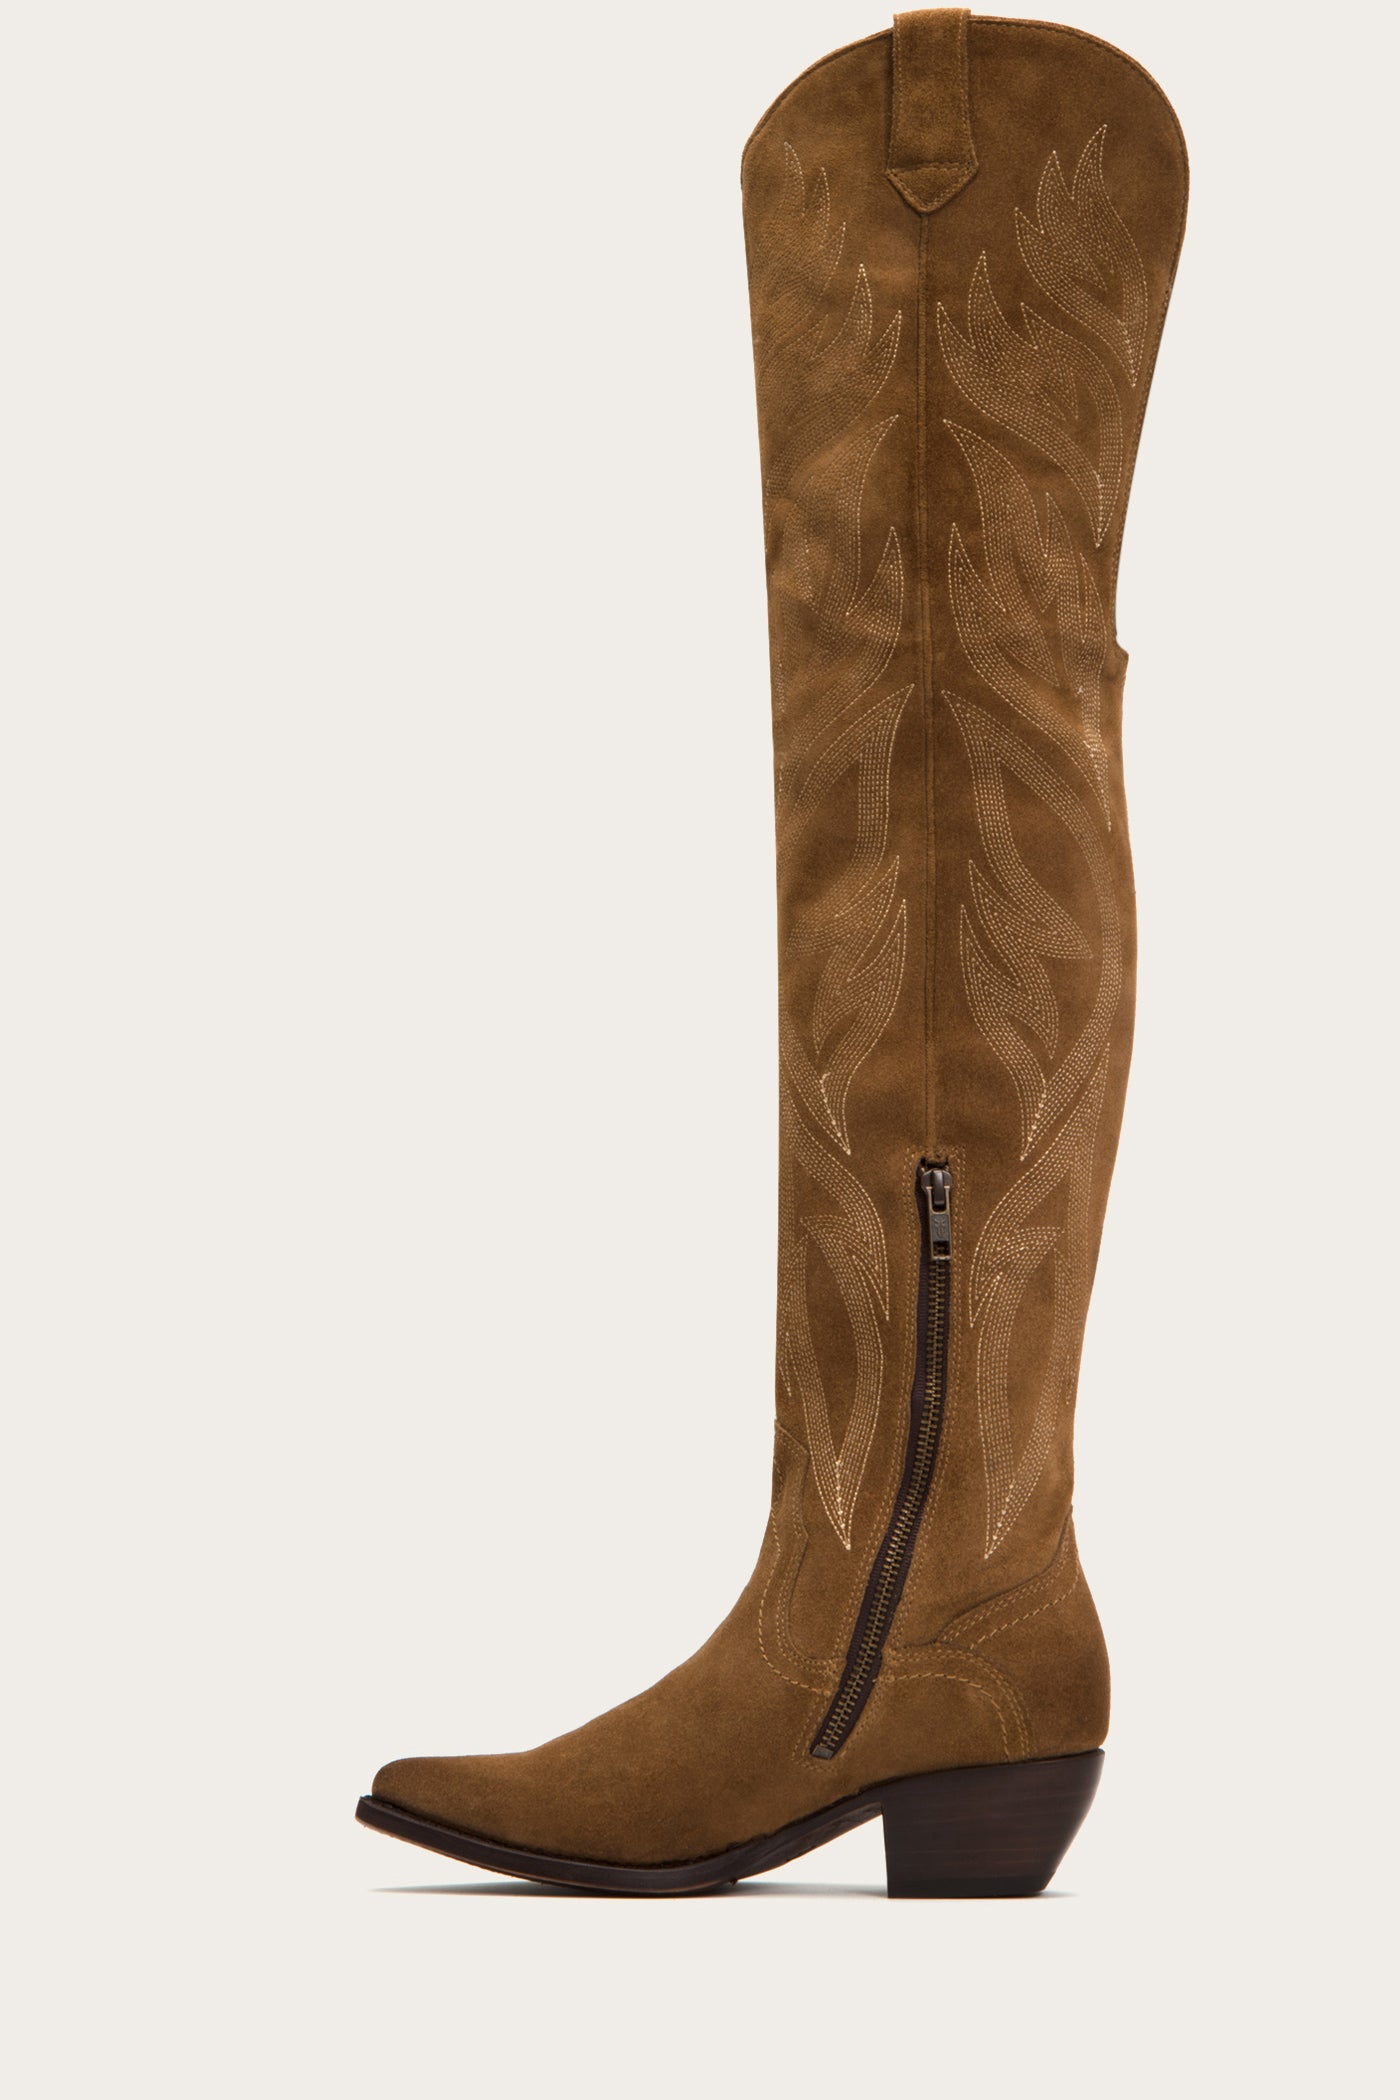 frye thigh high suede boots